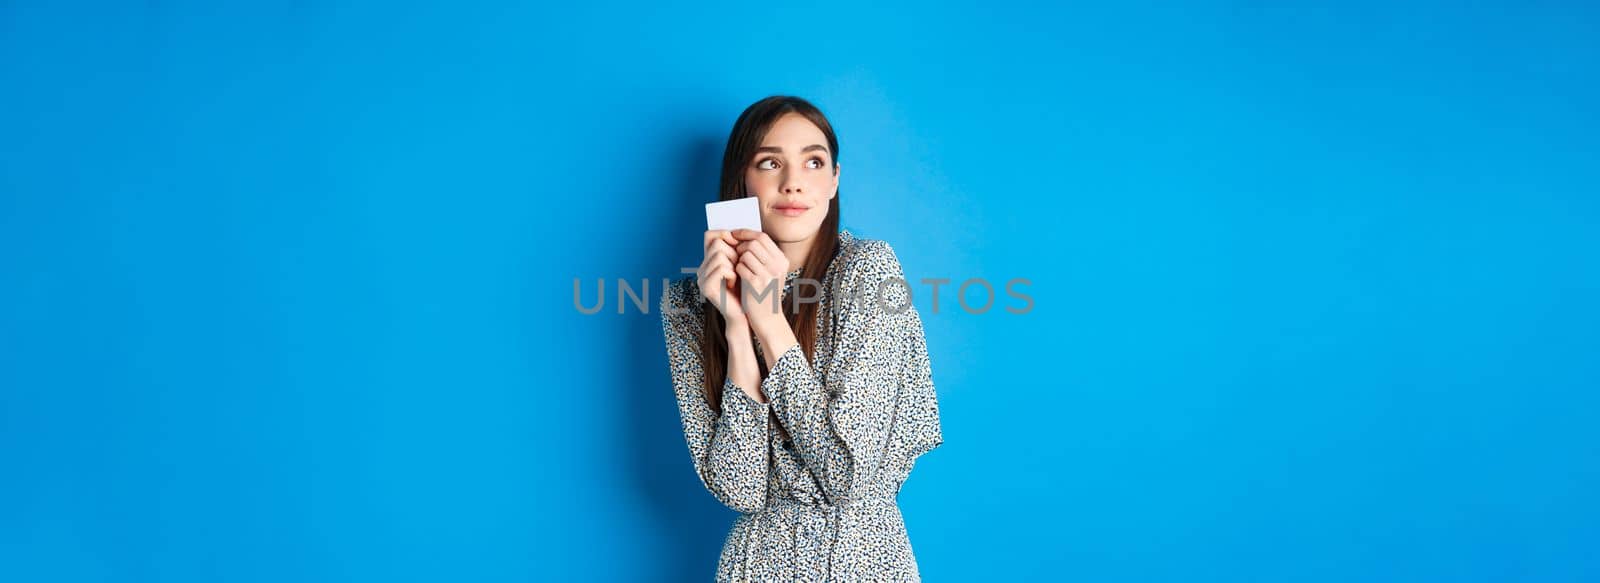 Romantic cute girl in dress dreaming of shopping, holding credit card and looking at logo with tender smile, standing on blue background.